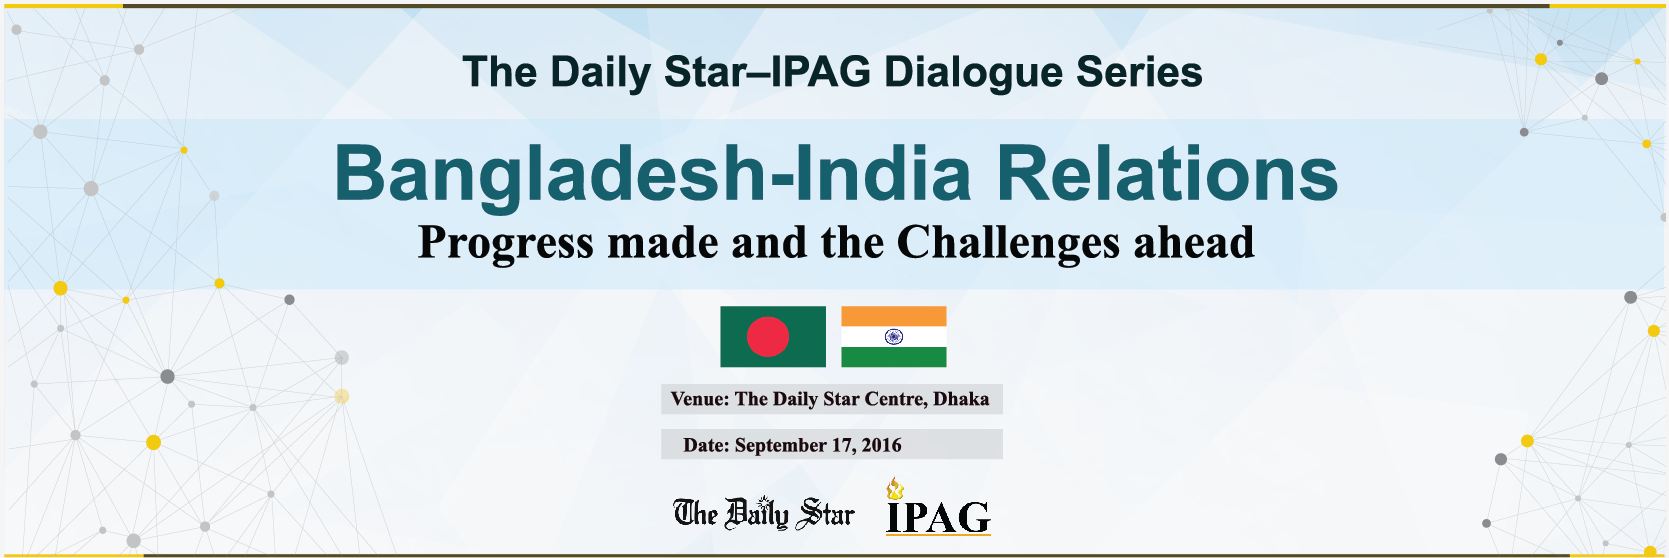 The Daily Star- IPAG Dialogue Series: Bangladesh-India Relations: Progress made and the Challenges ahead